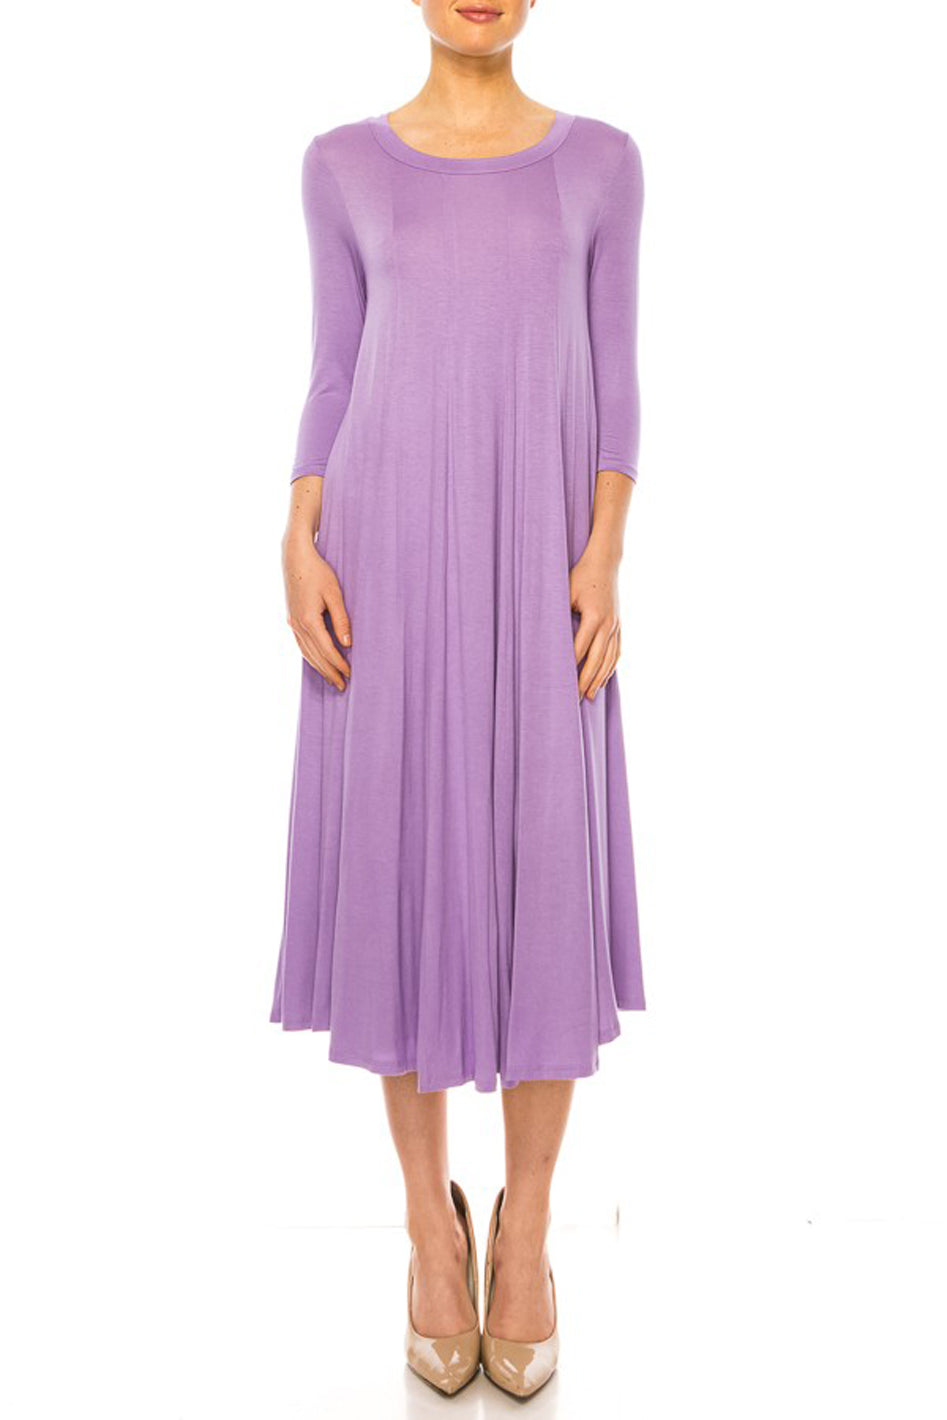 Solid jersey knit a-line dress - Azoroh